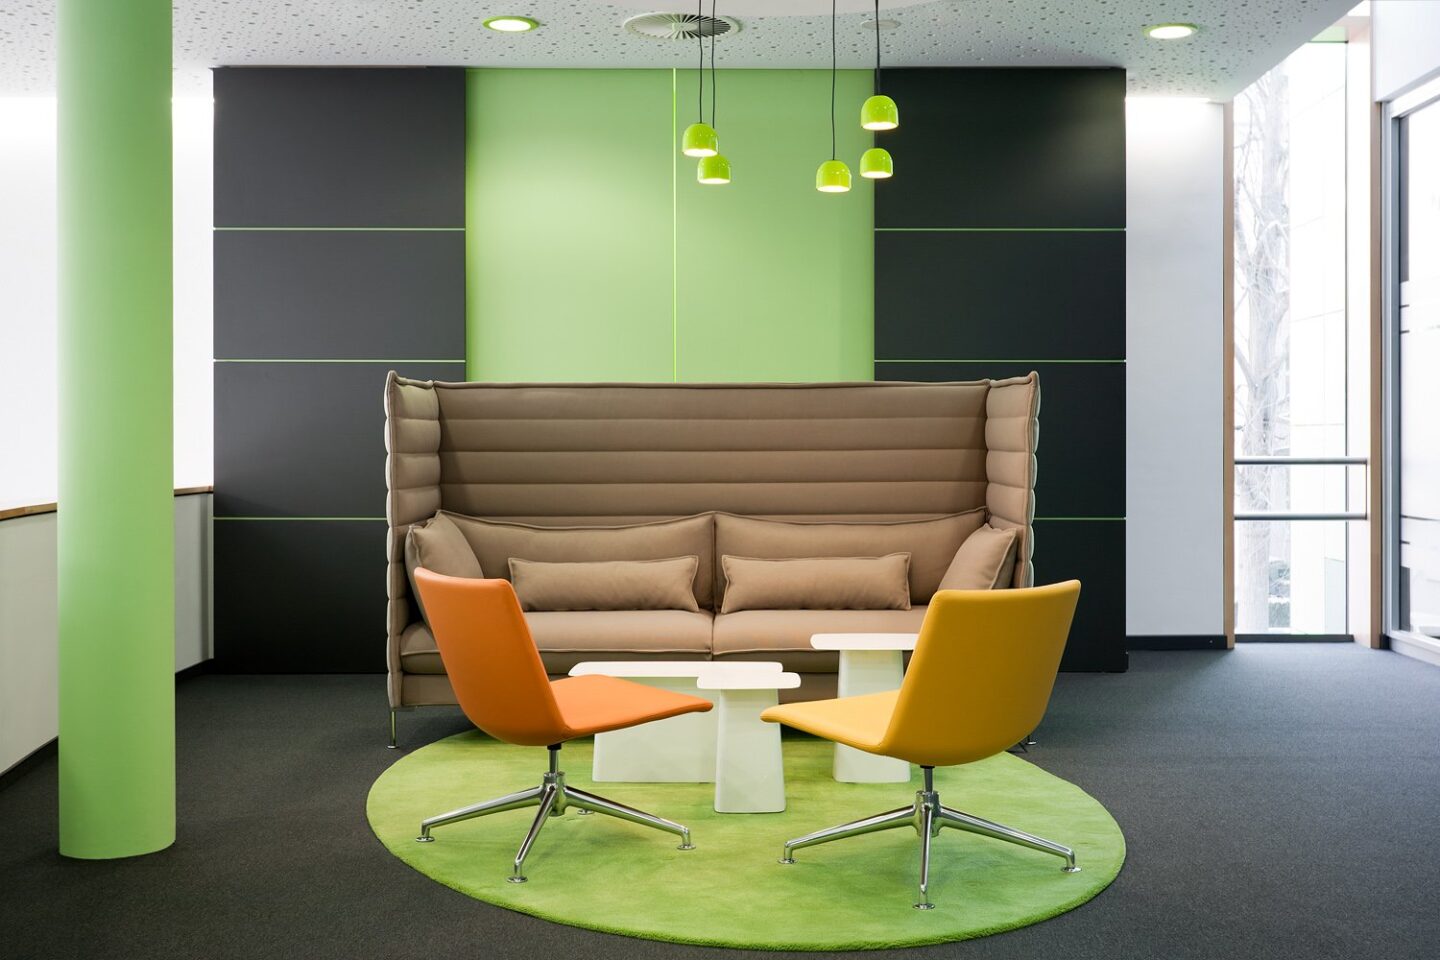 feco-feederle│office furniture Karlsruhe│partition wall systems│VBL, Karlsruhe